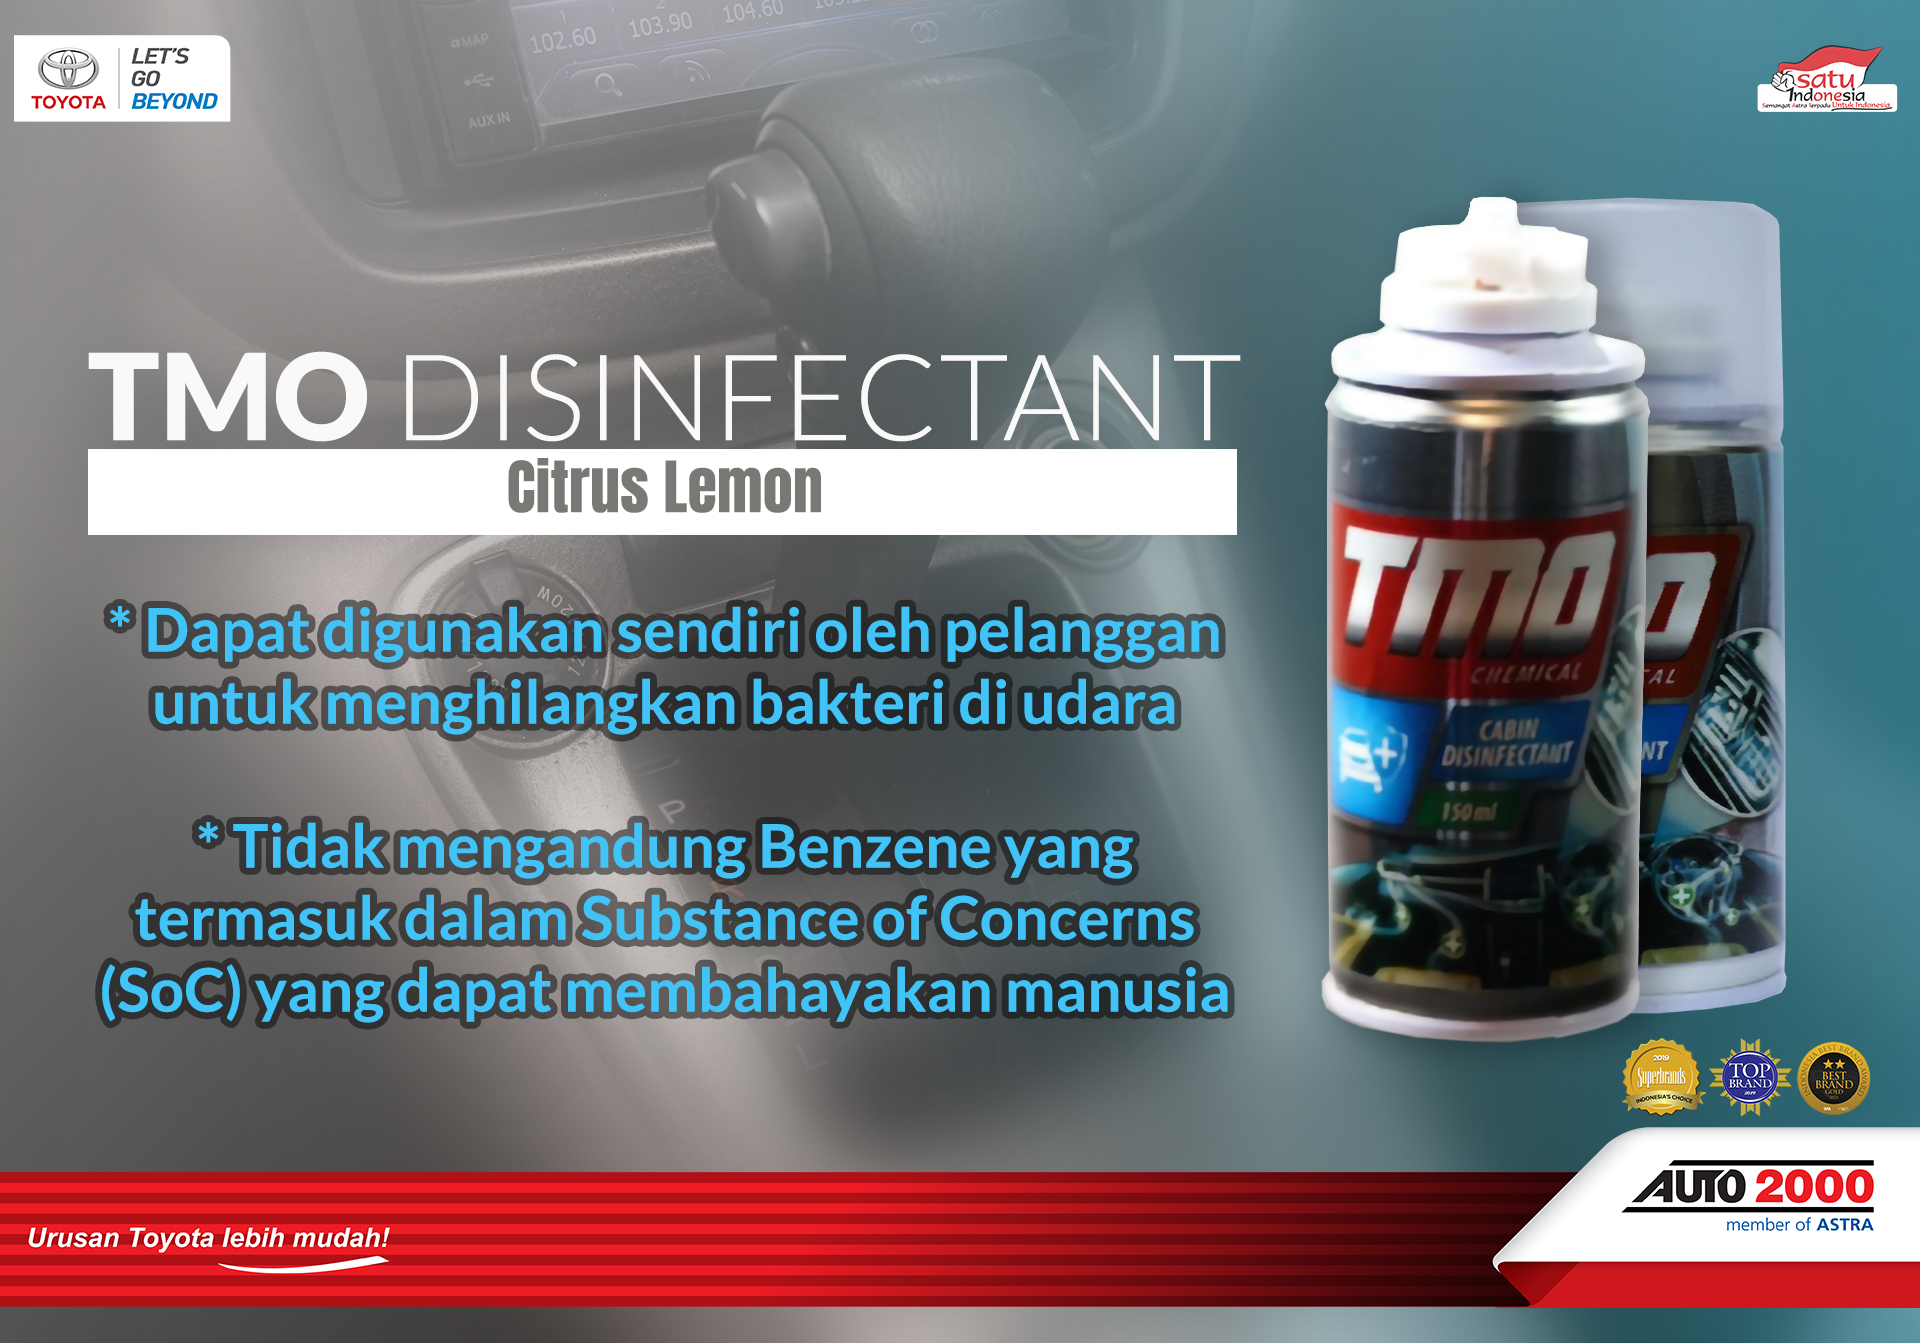 Disinfectant Mobil